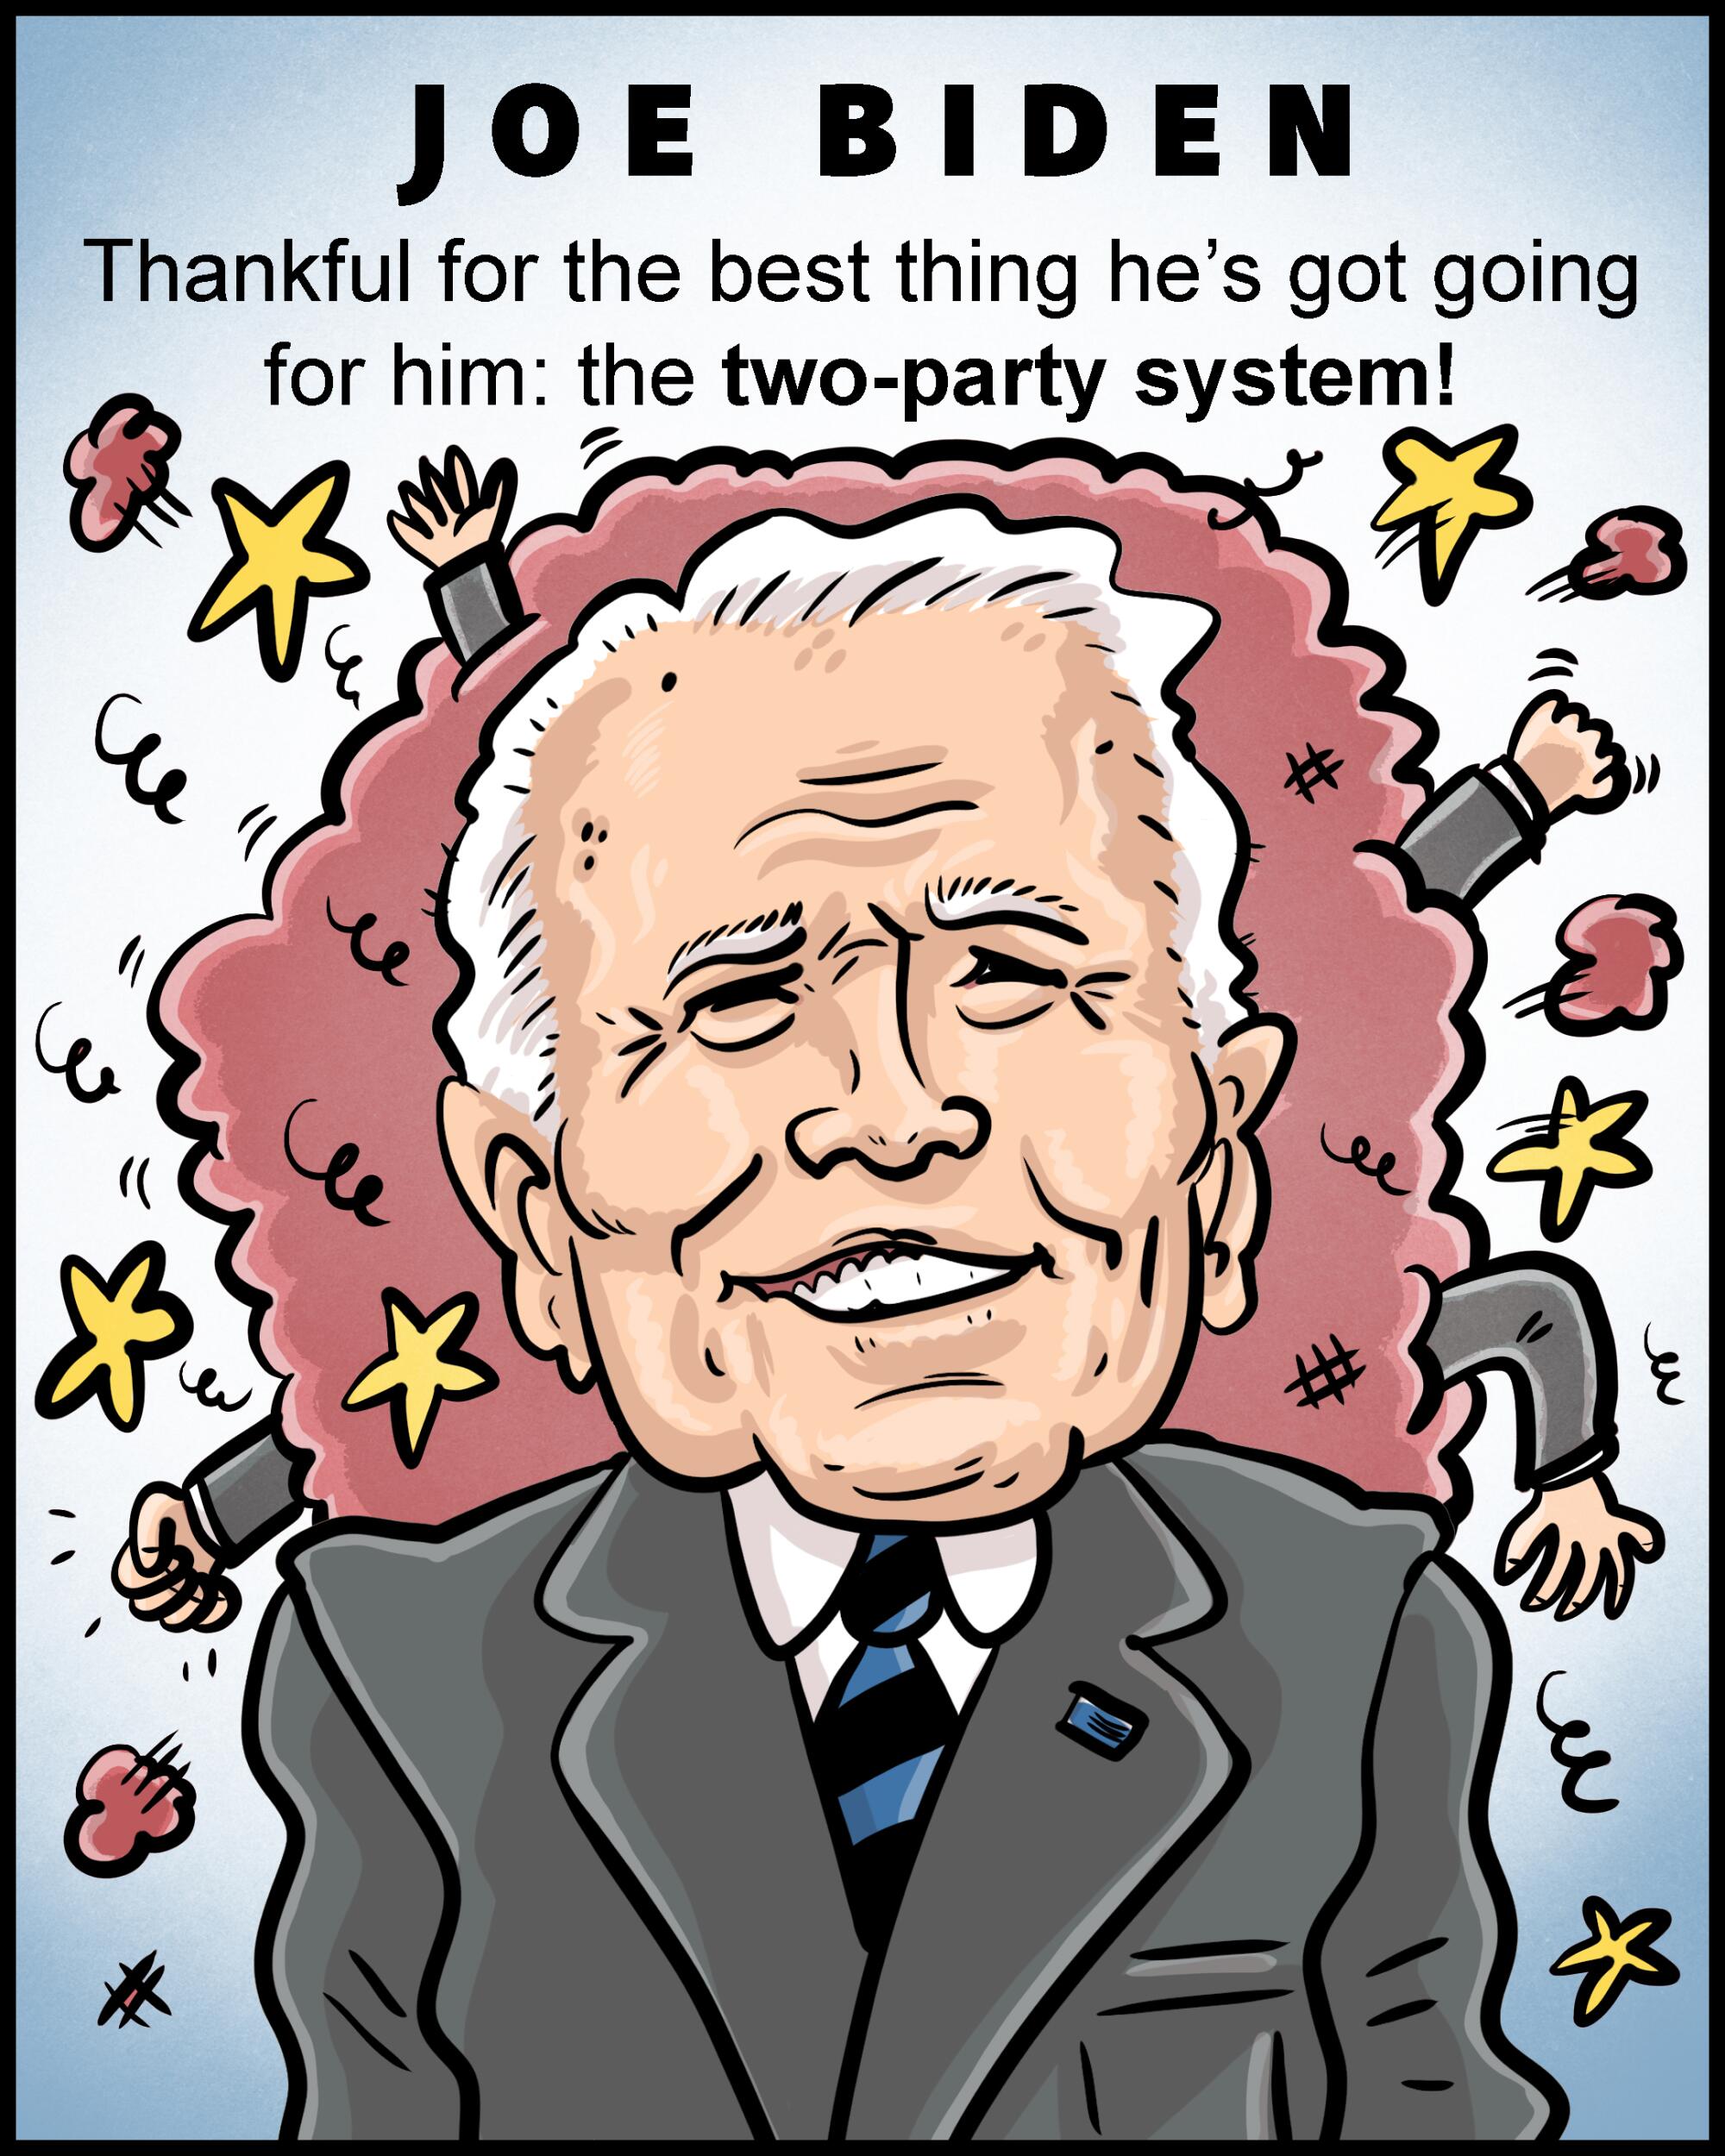 Joe Biden - Thankful for the best thing he's got going for him: the two-party system!